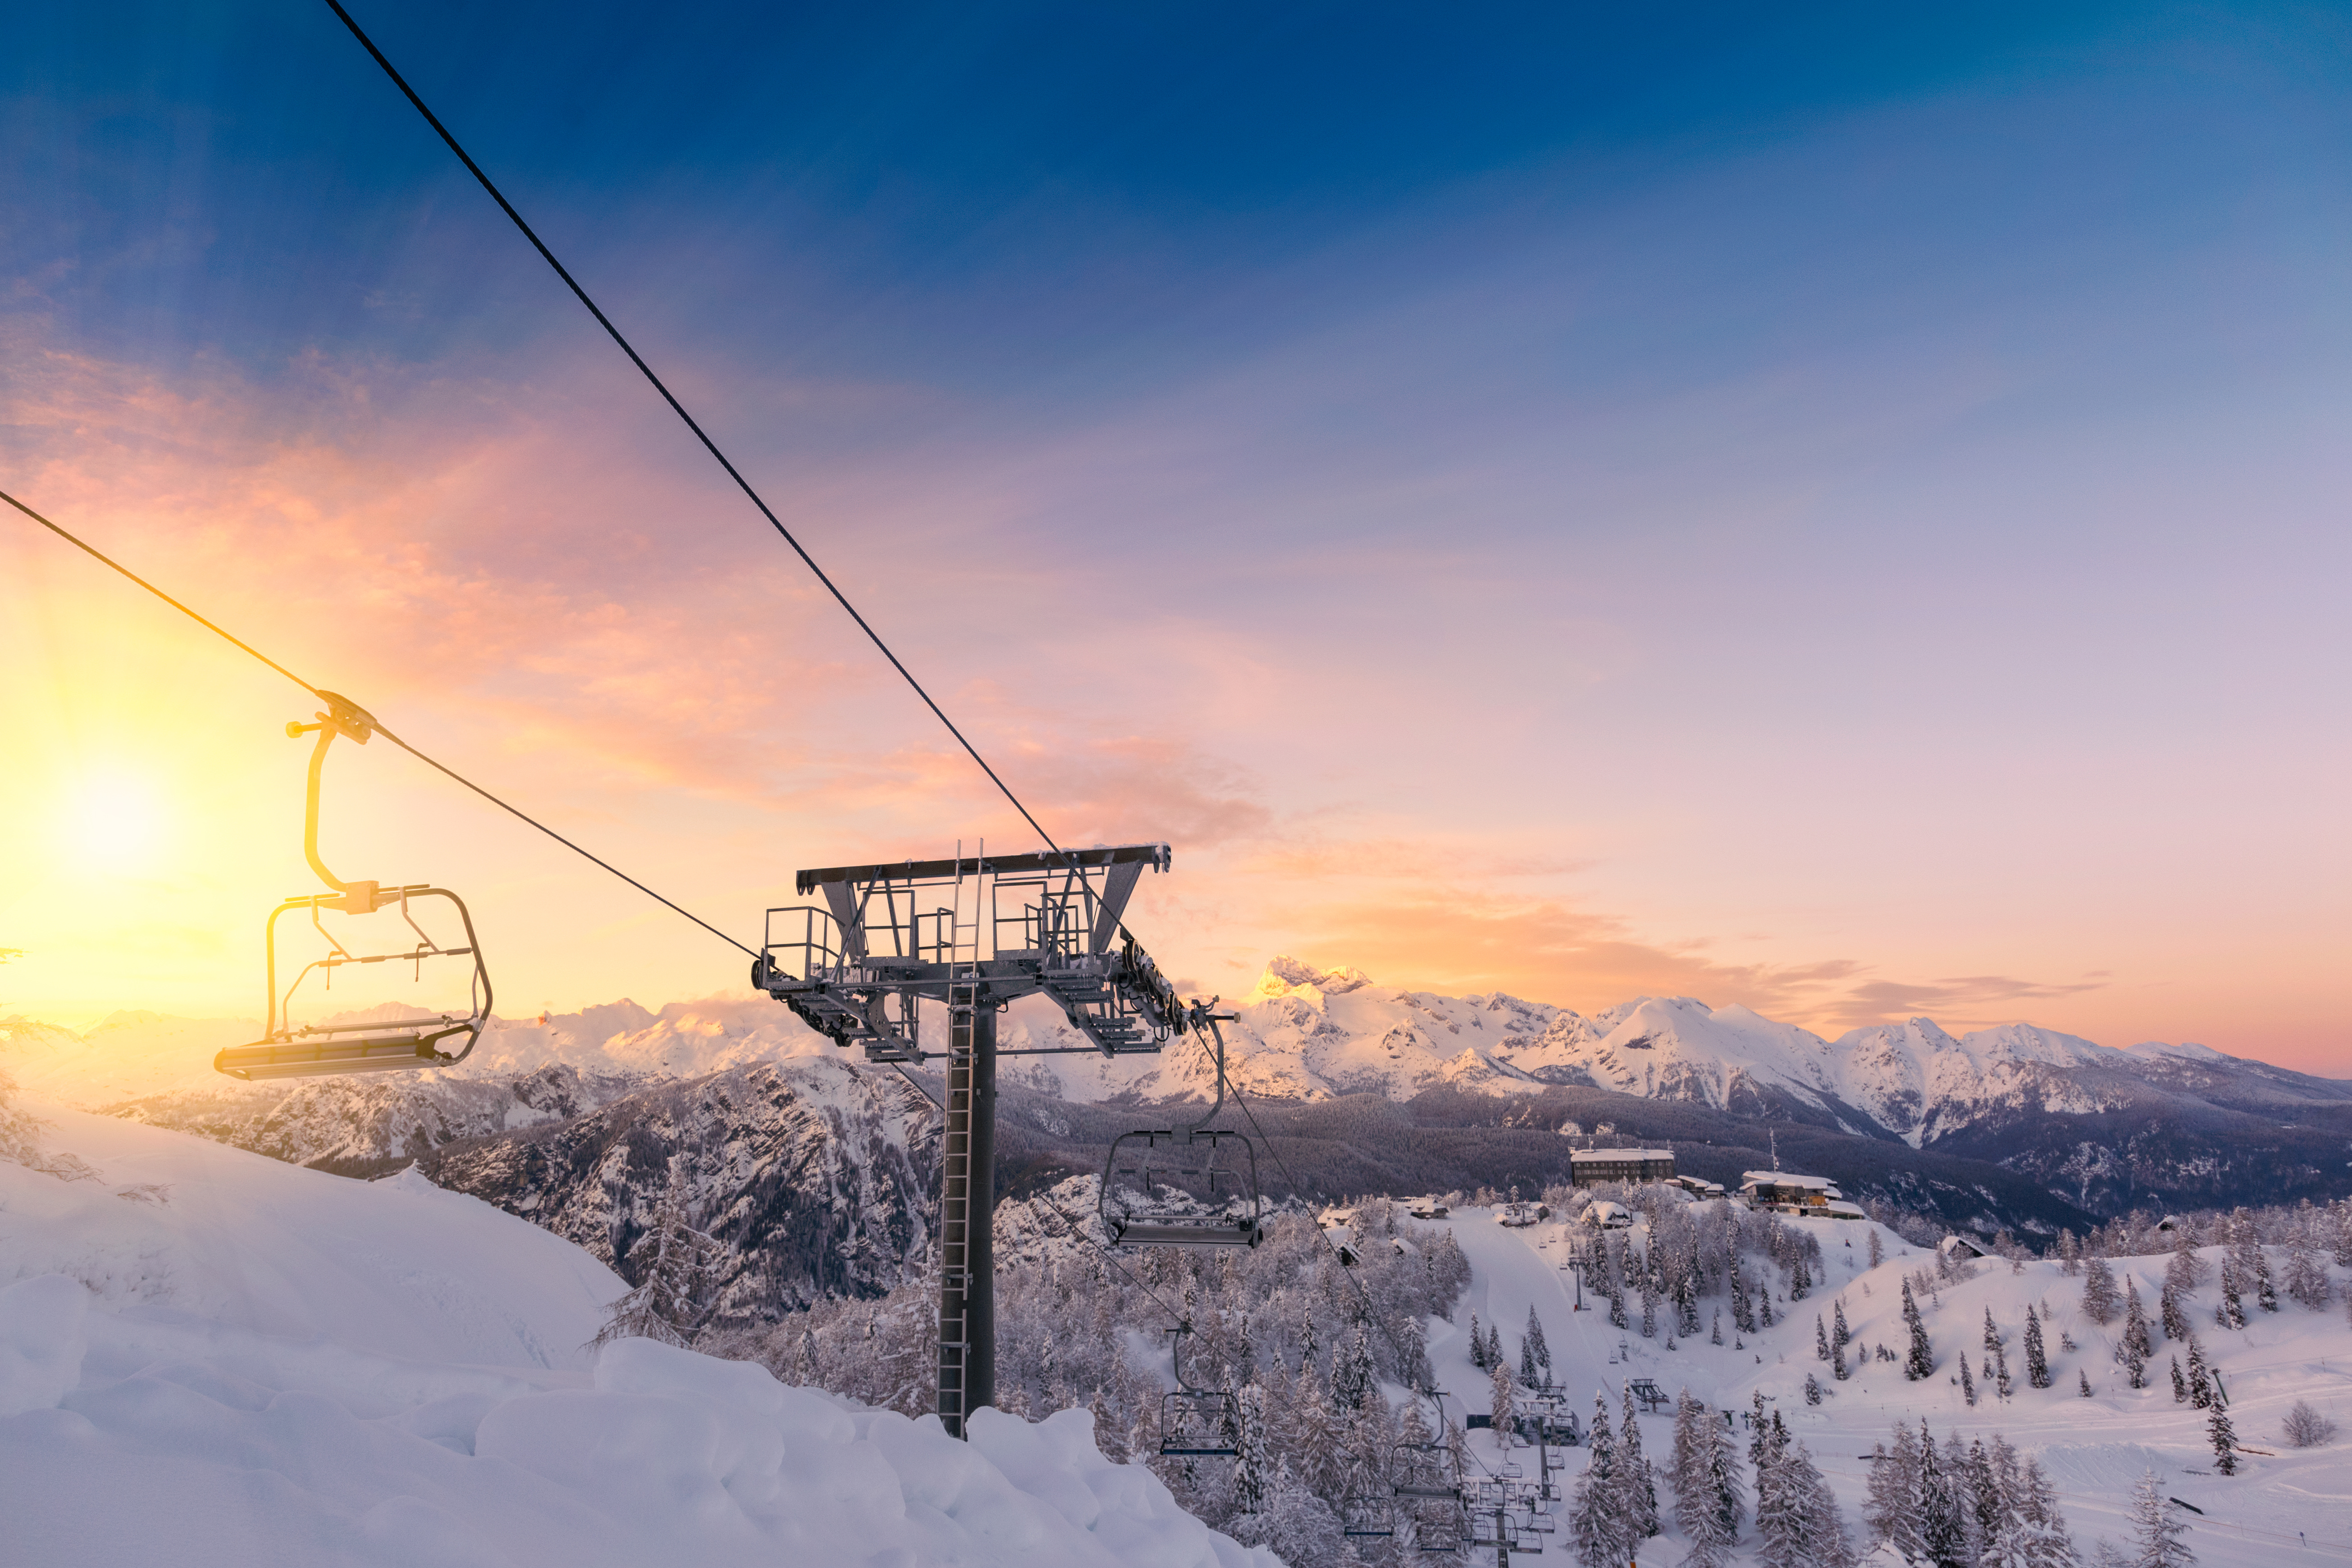 a view of the ski lifts with a beautiful sunrise behind